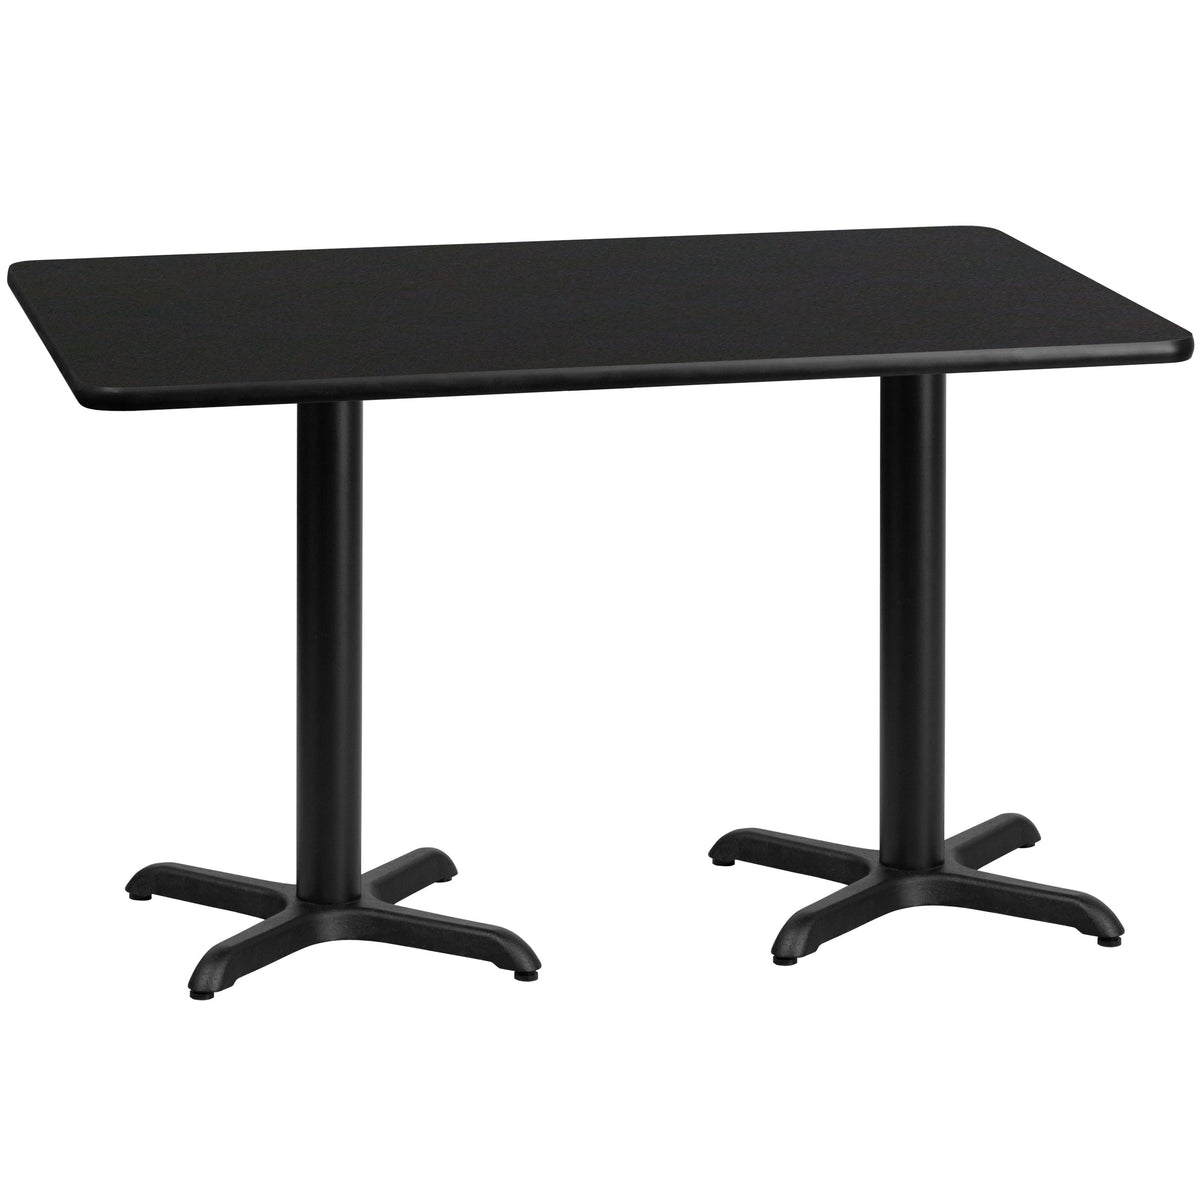 Black |#| 30inch x 60inch Rectangular Black Laminate Table Top & 22inch x 22inch Table Height Bases